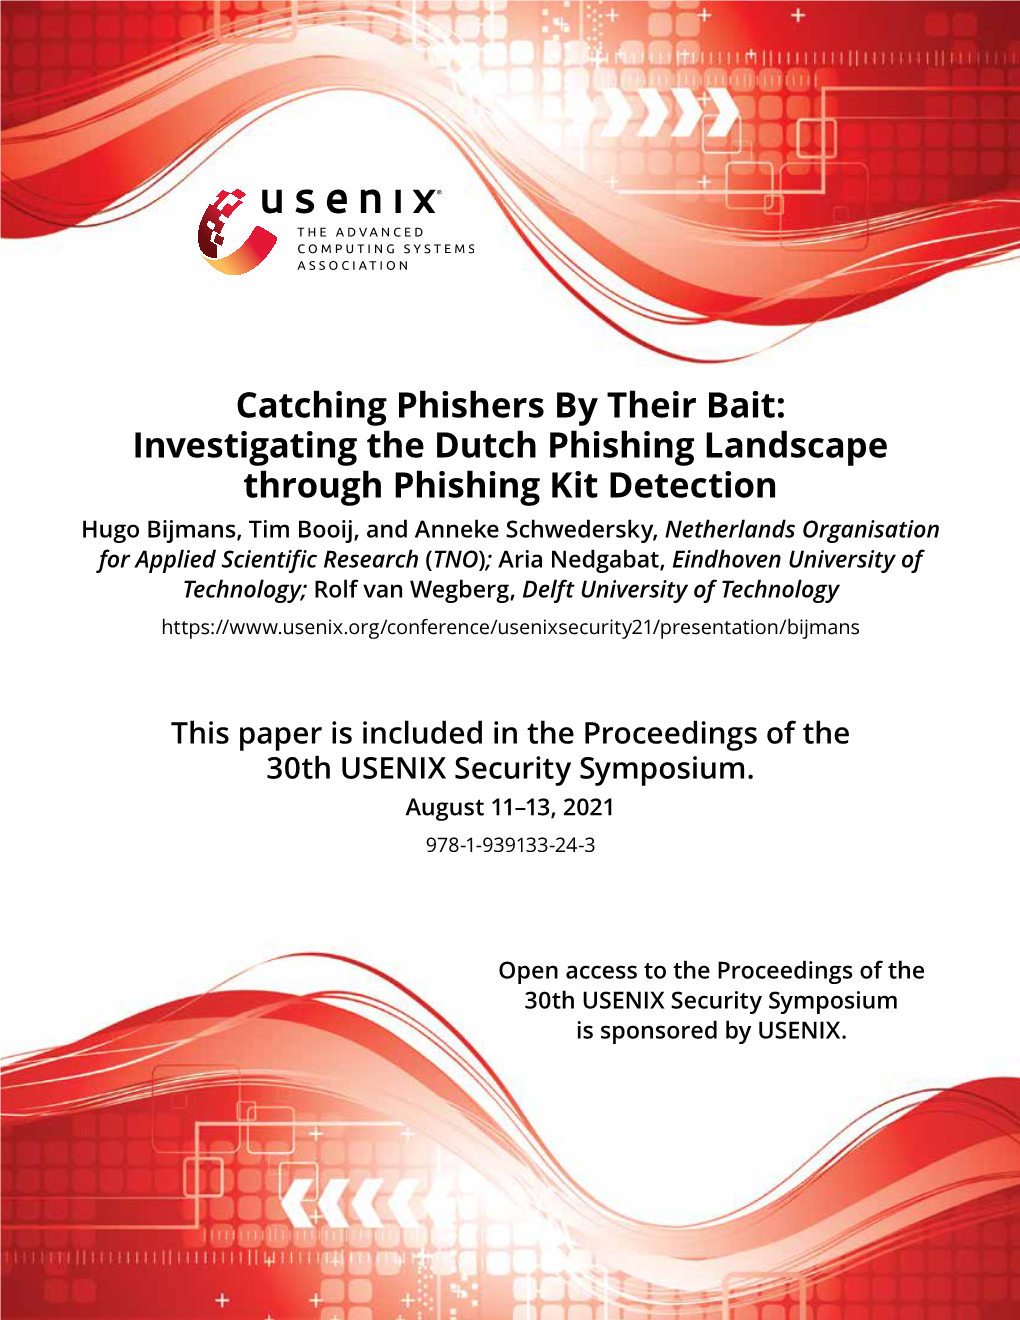 Catching Phishers by Their Bait: Investigating the Dutch Phishing